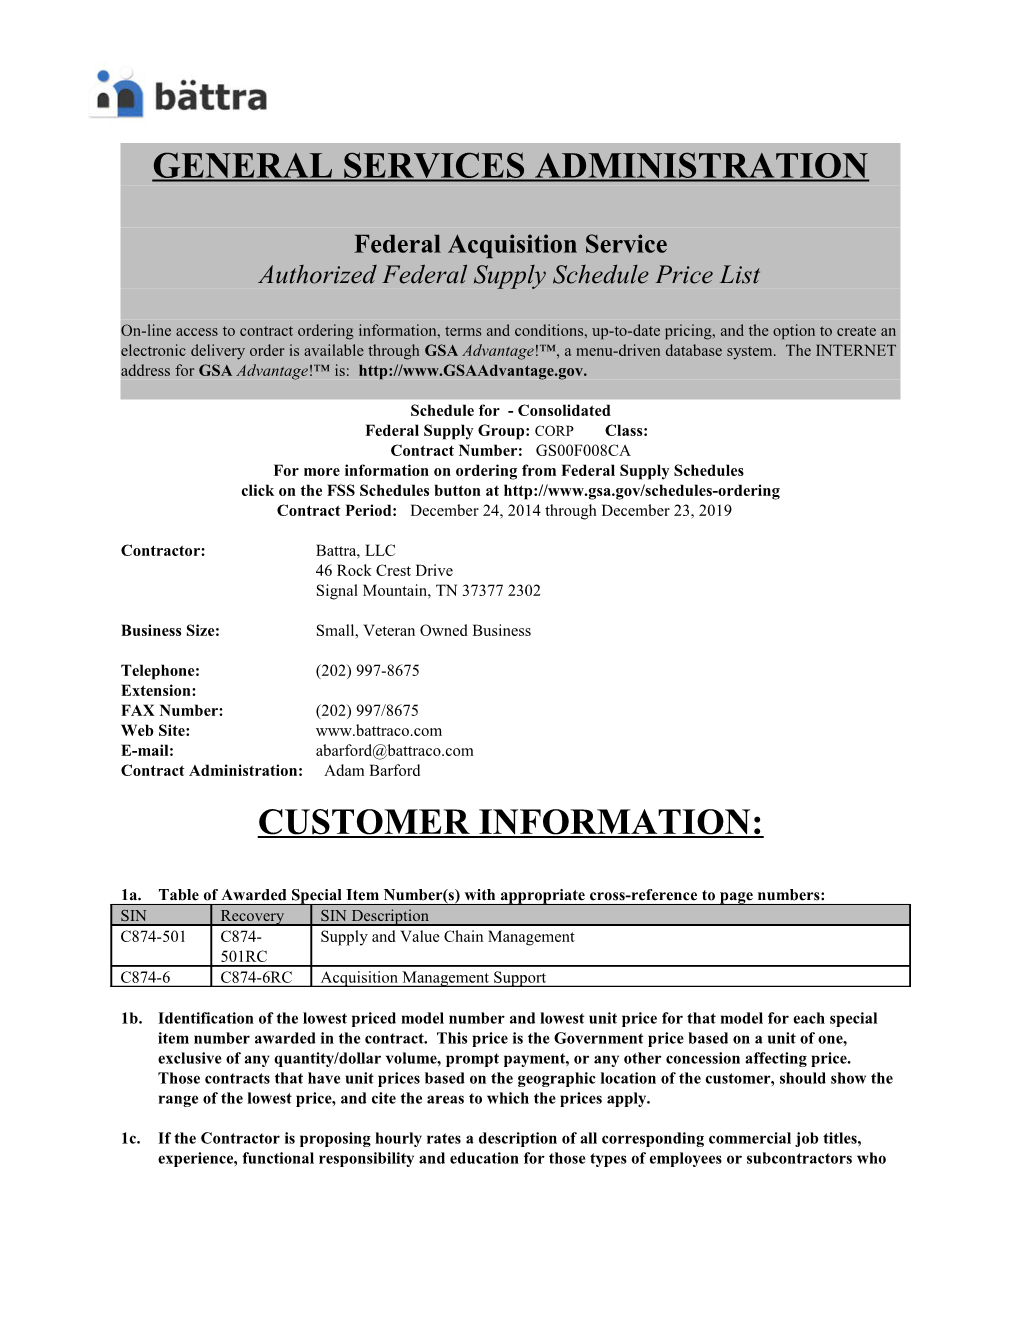 General Services Administration s25